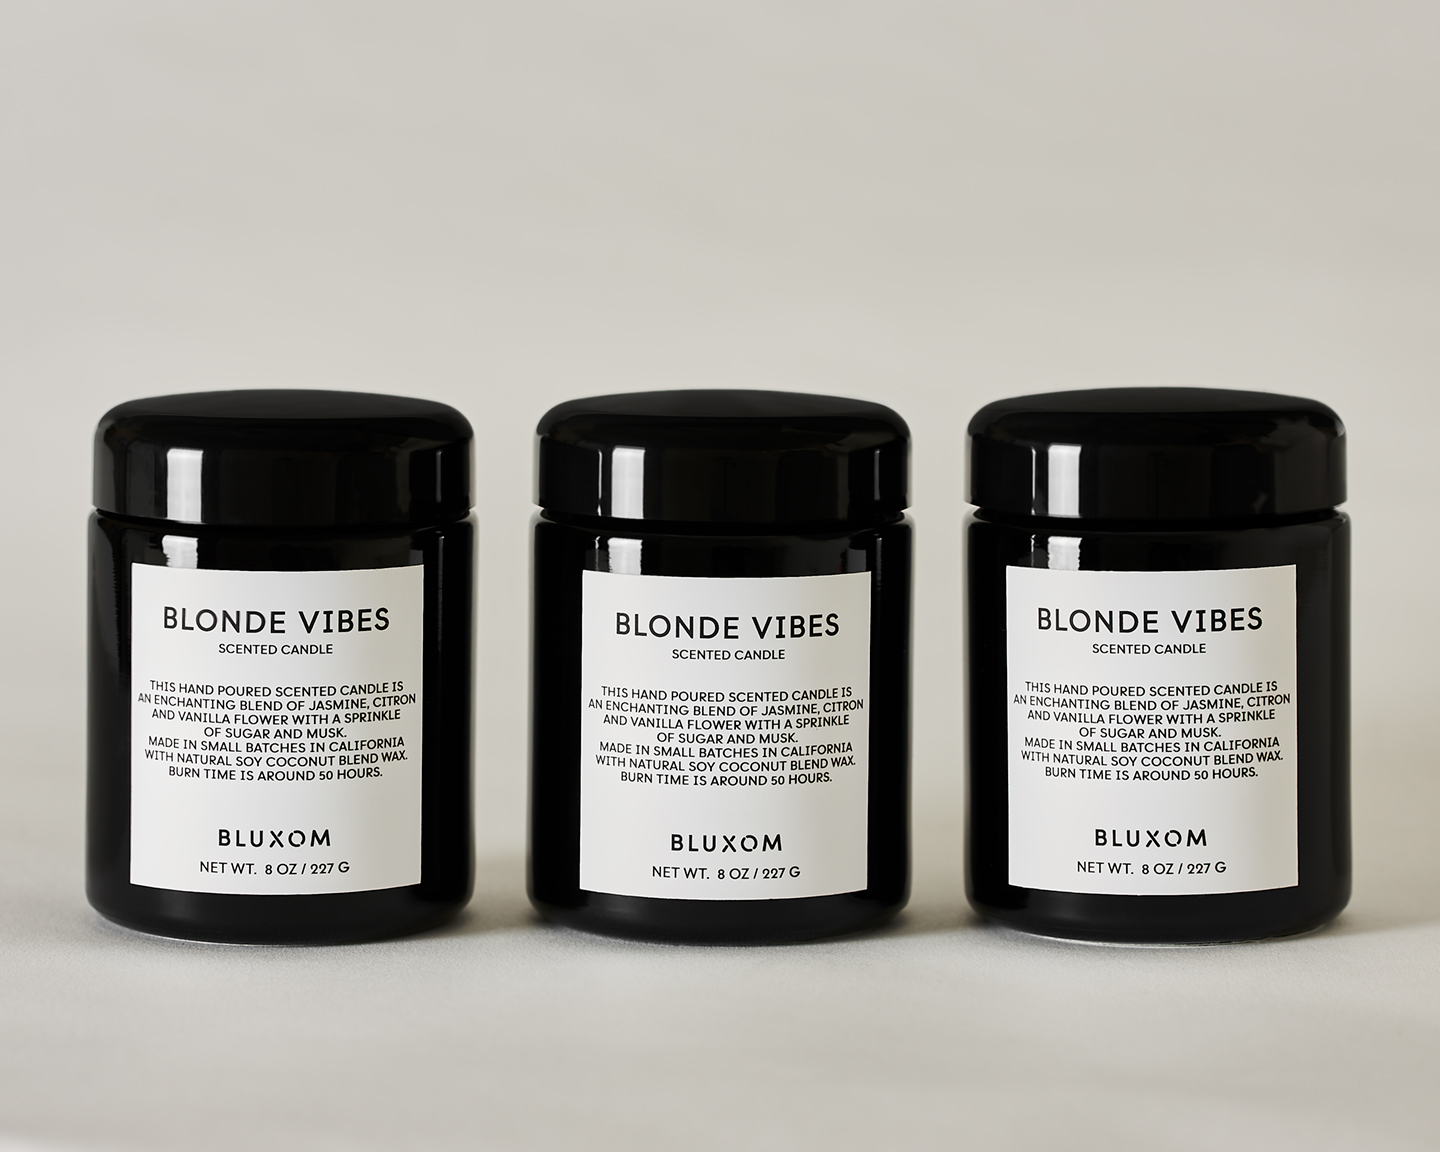 BLUXOM BLONDE VIBES COCONUT SOY SCENTED CANDLE TRIO 3 x 8oz / 227g alt